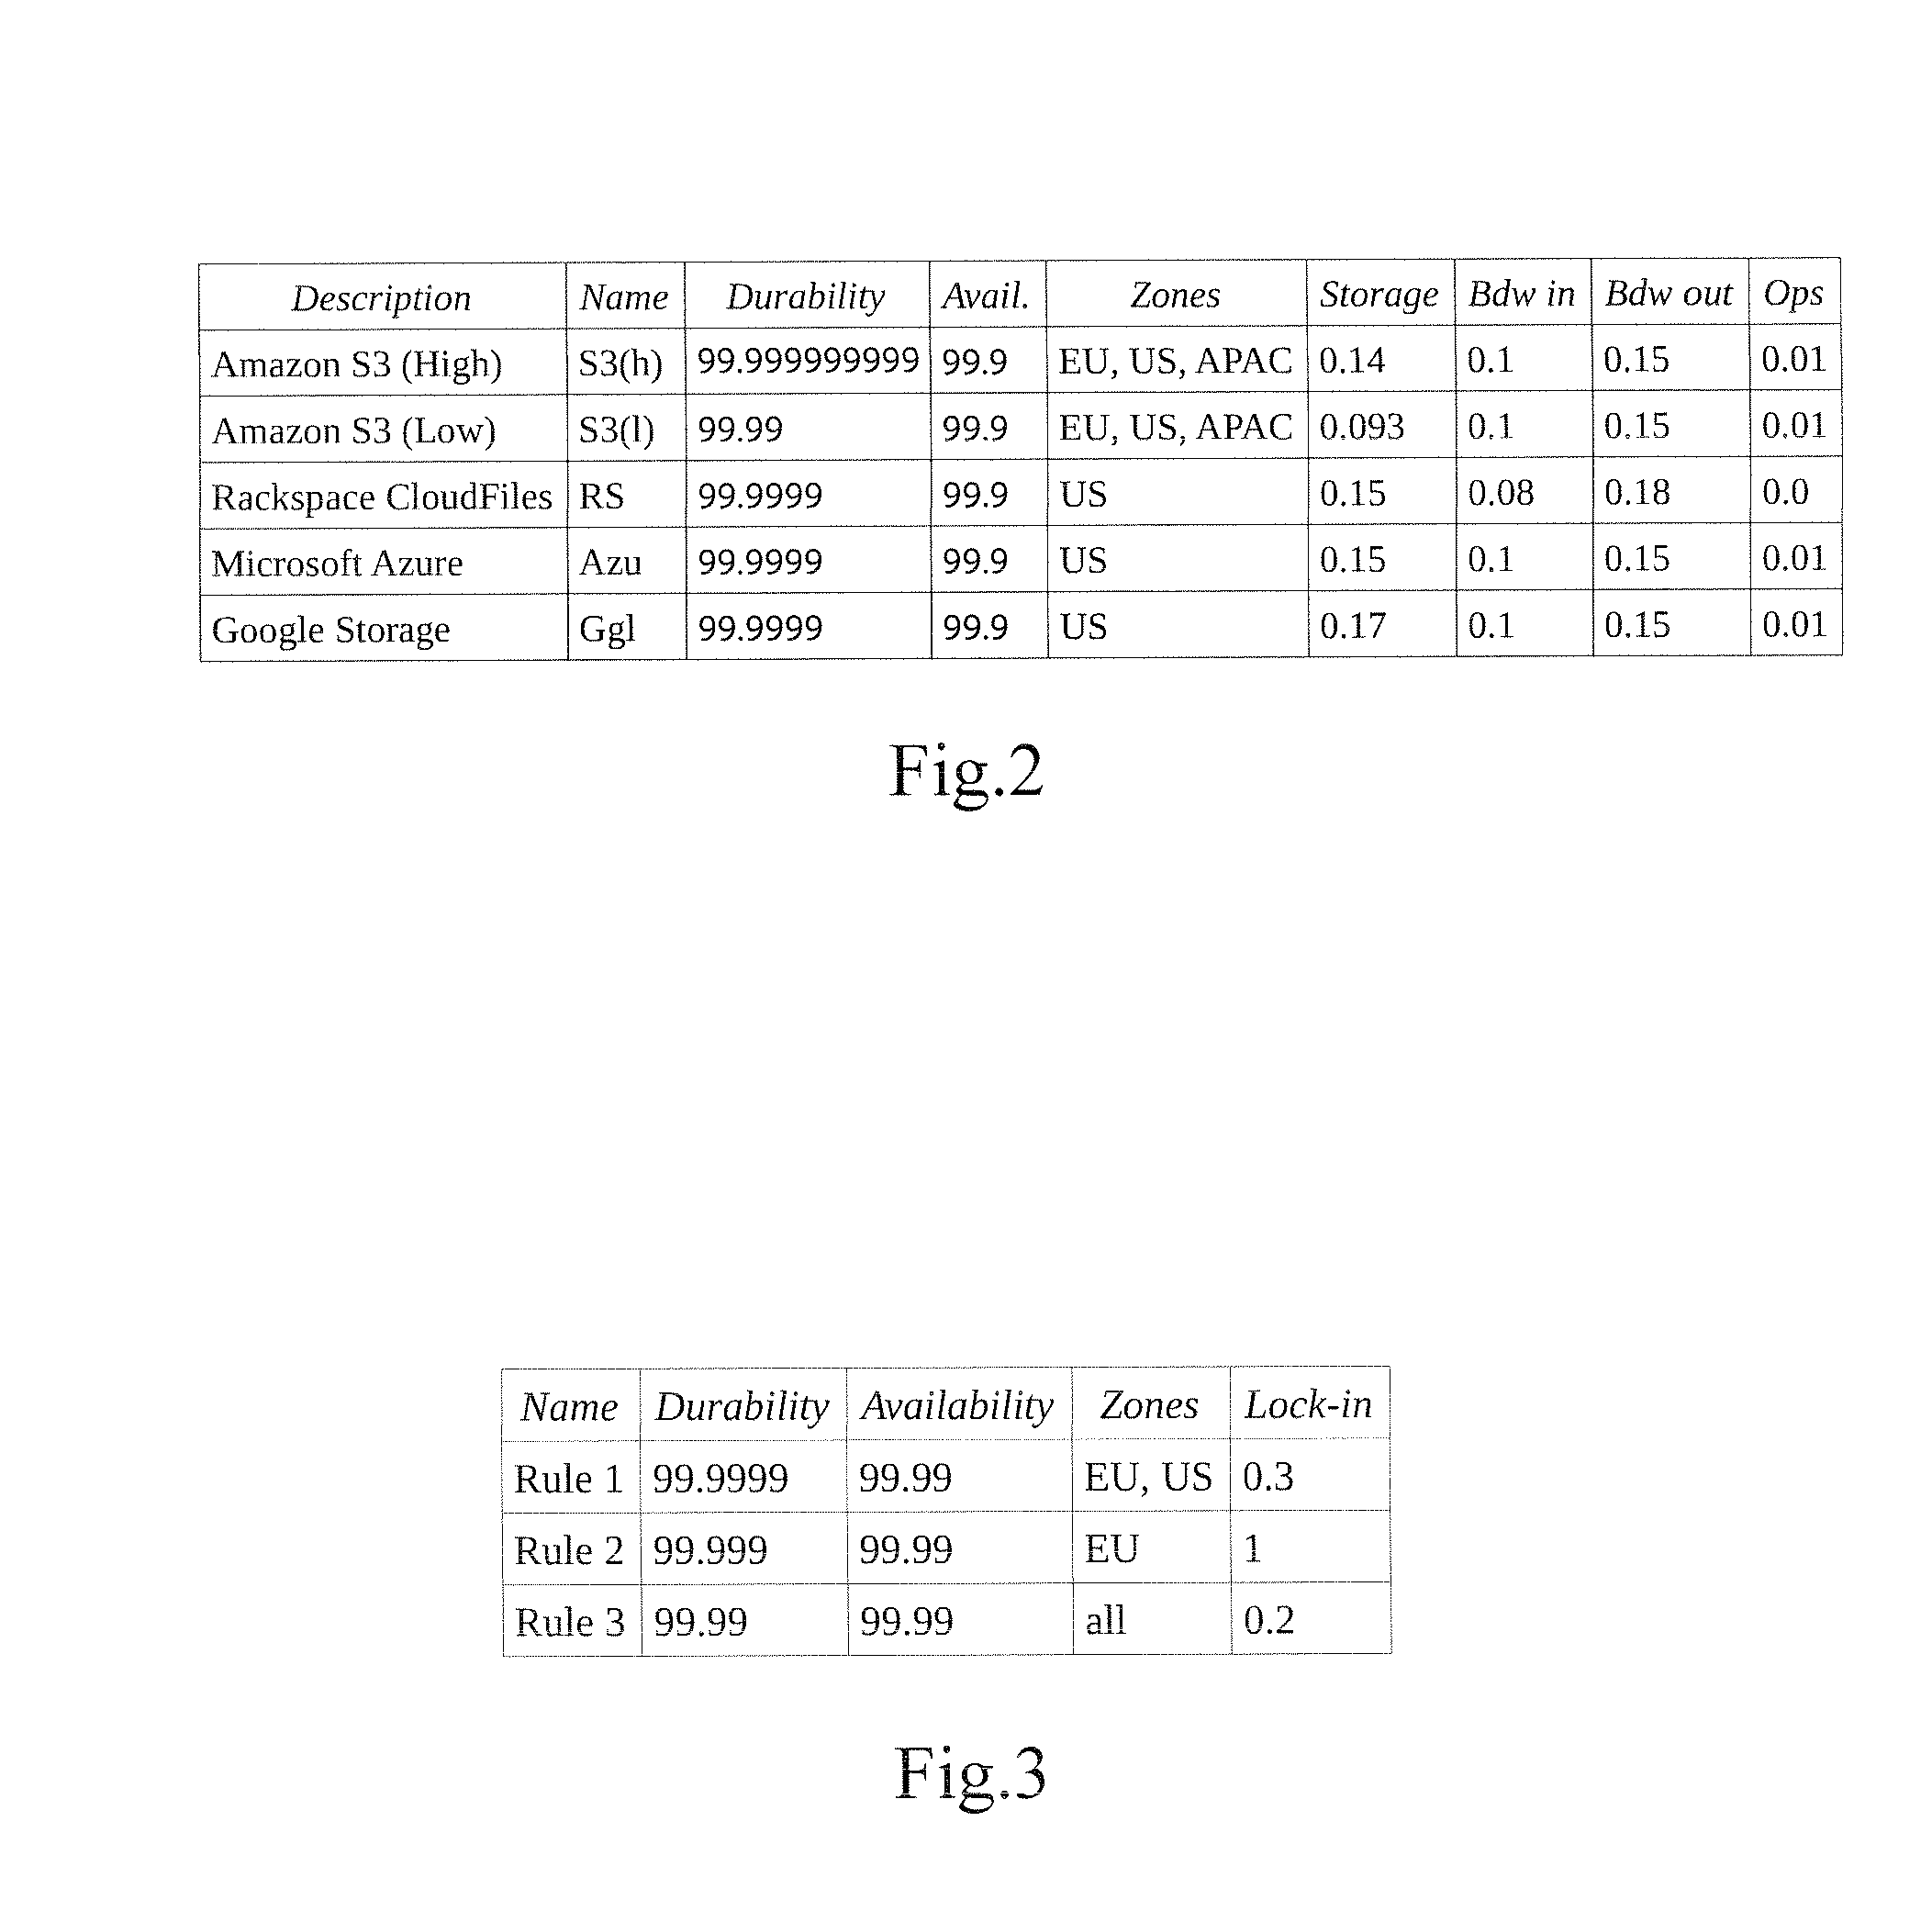 System and Method for Optimizing Data Storage in a Distributed Data Storage Environment